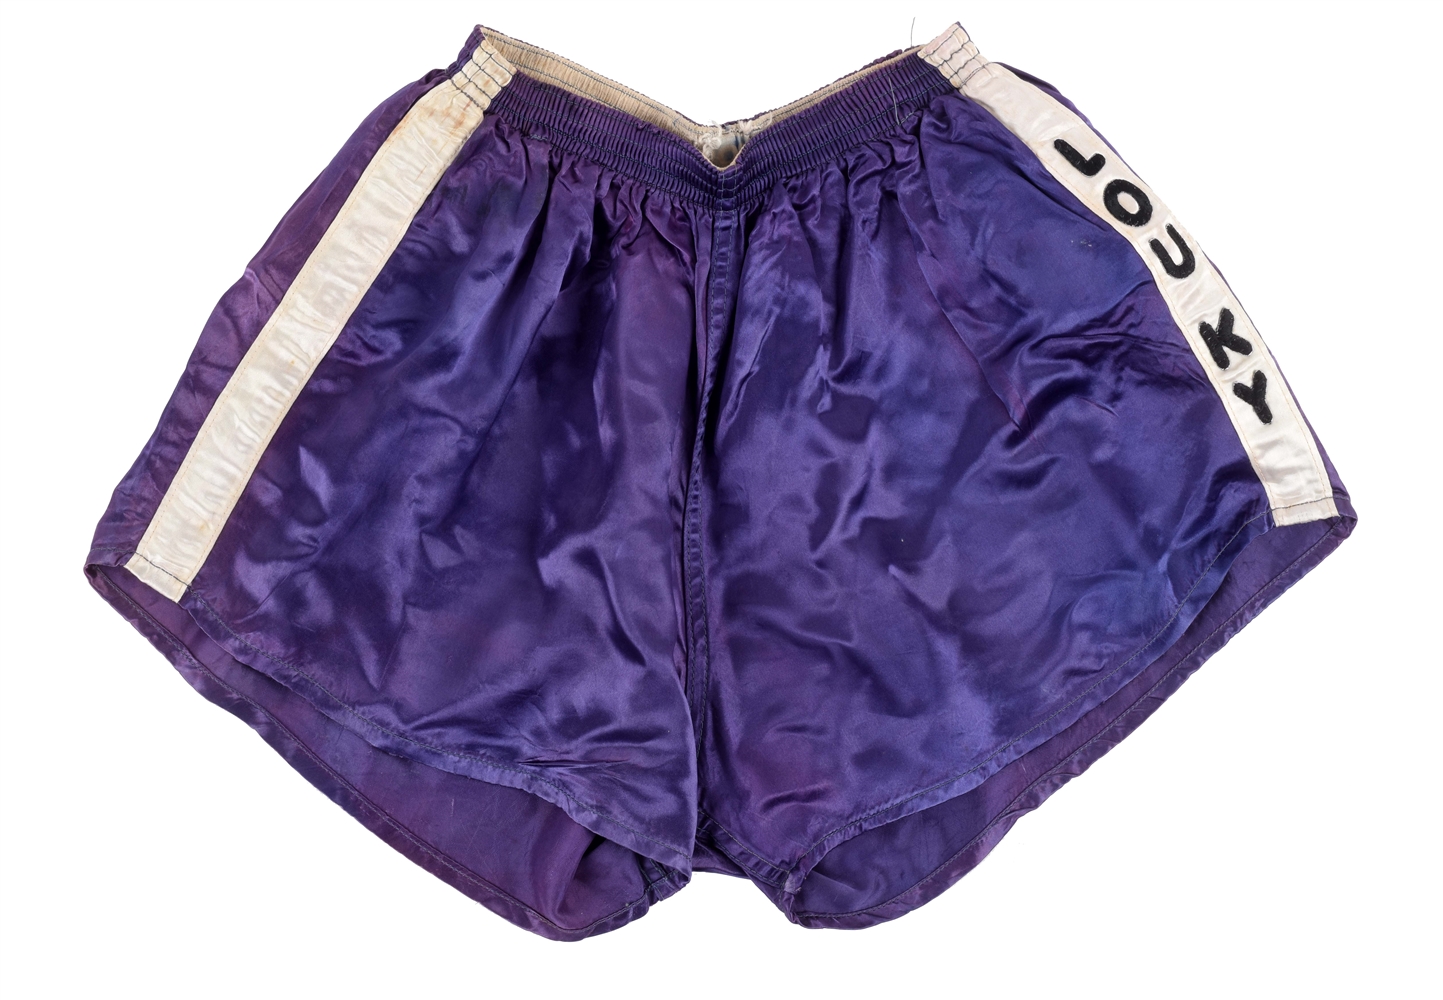 CASSIUS CLAY WORN TRAINING TRUNKS EARLIEST KNOWN.